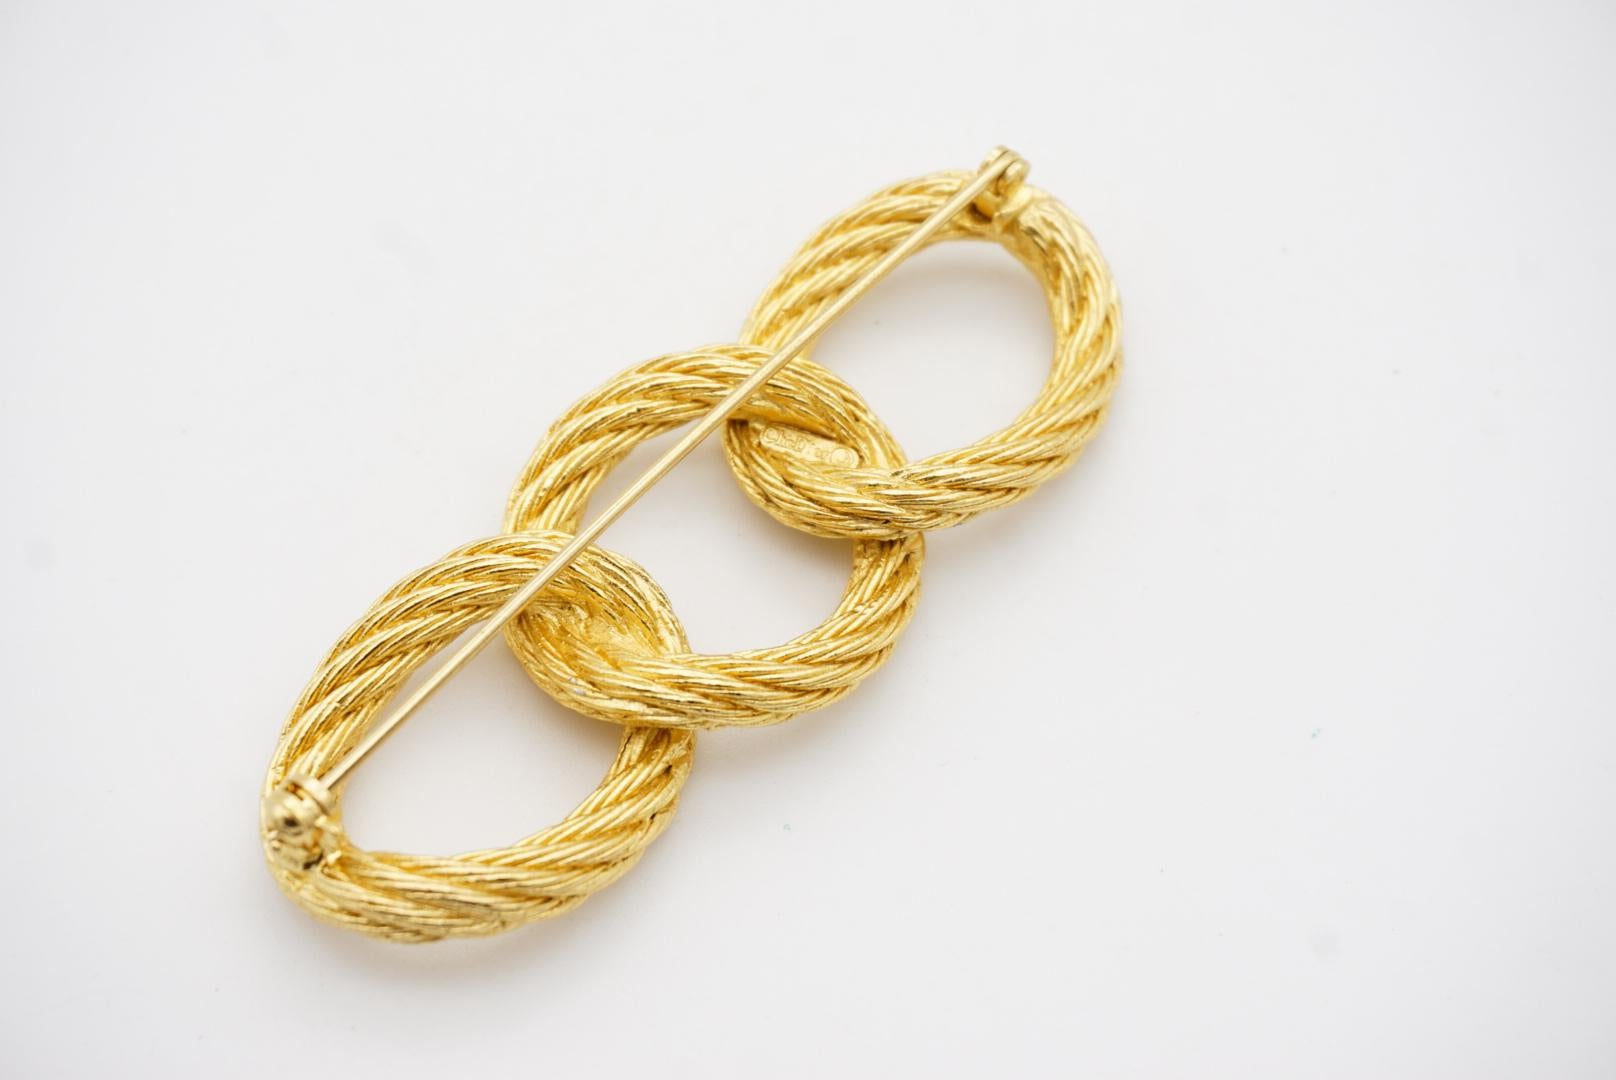 Christian Dior 1980s Vintage Large Trio Oval Interlocked Rope Twist Knot Brooch For Sale 6